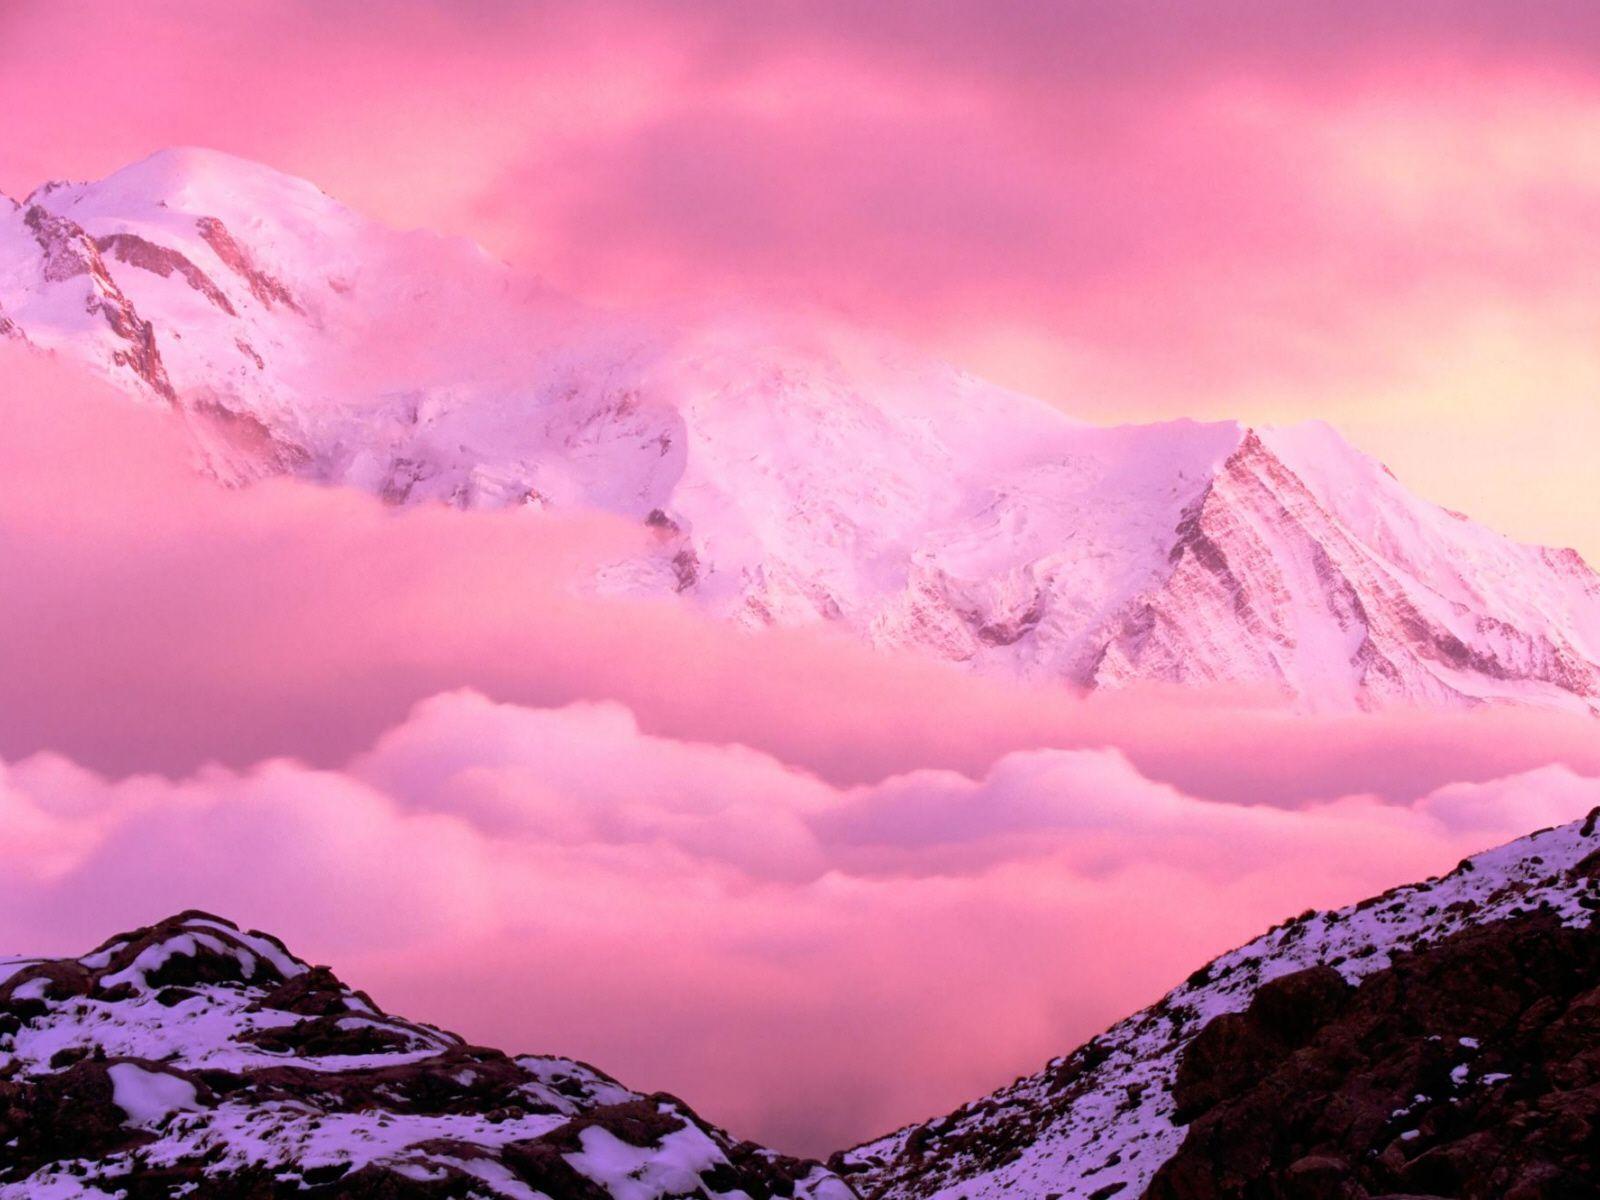 View Of The Month Above The Pink Clouds And The Mountain During Sunset